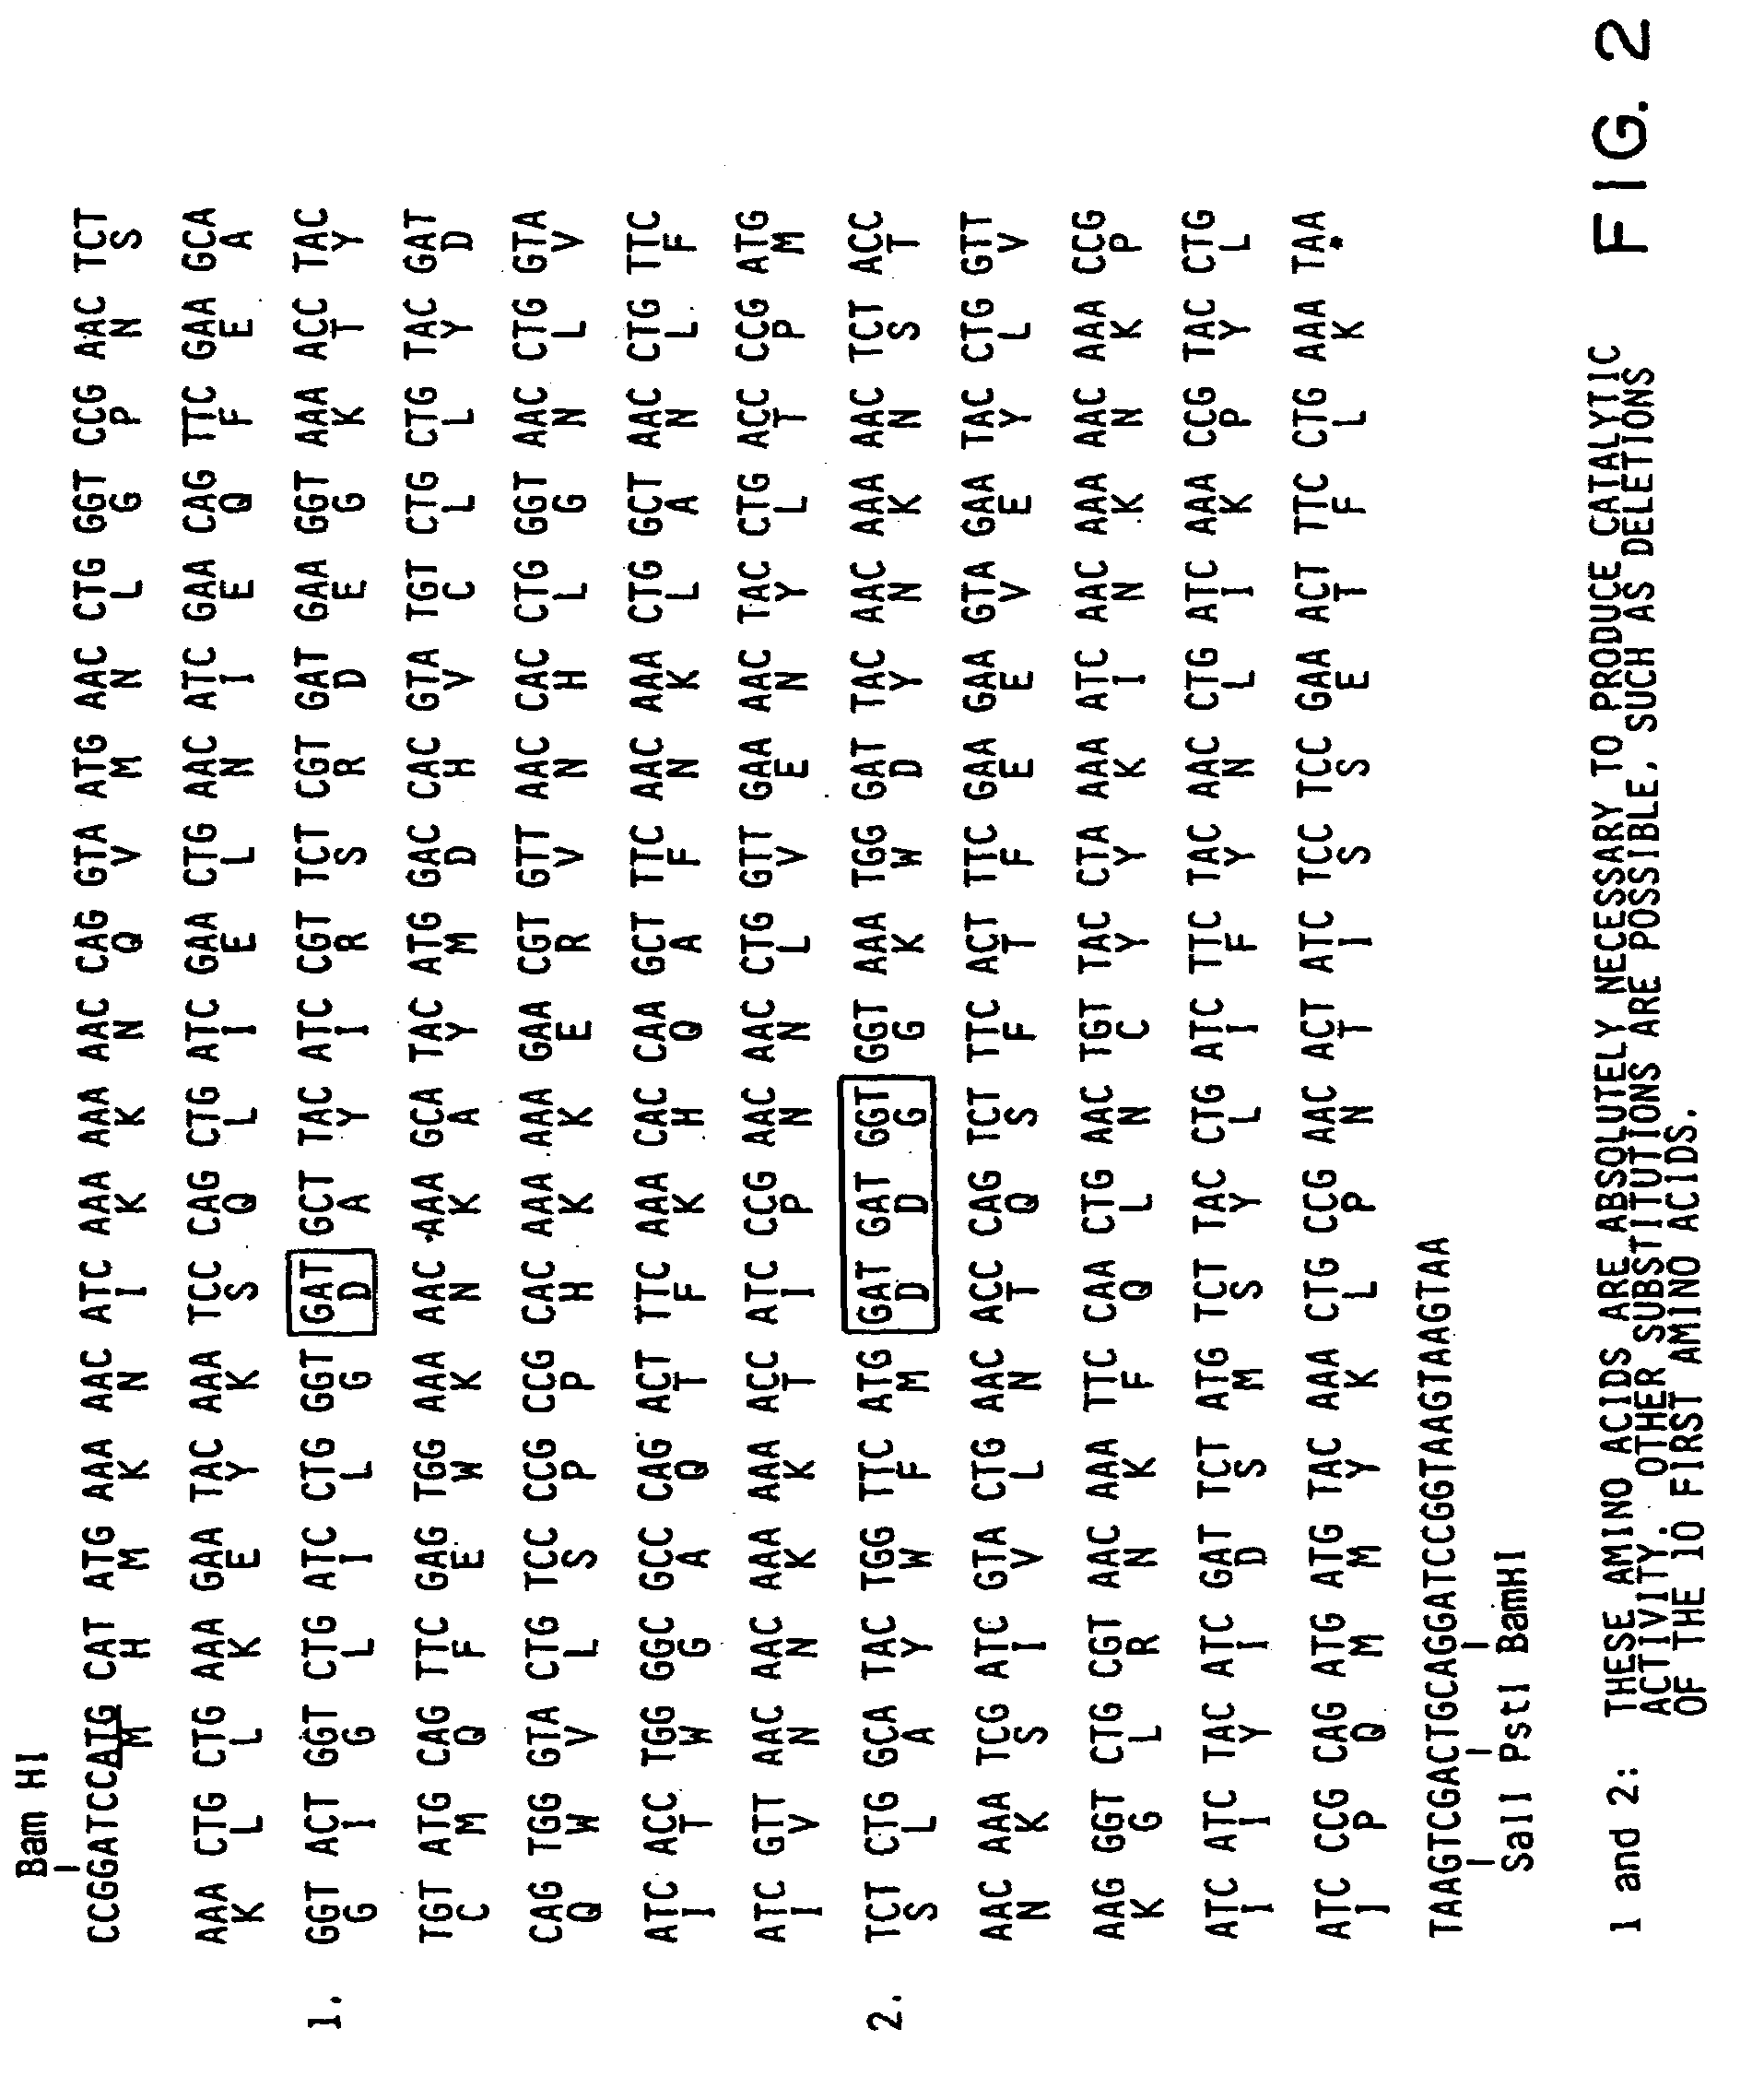 Nucleotide sequence encoding the enzyme I-SceI and the uses thereof